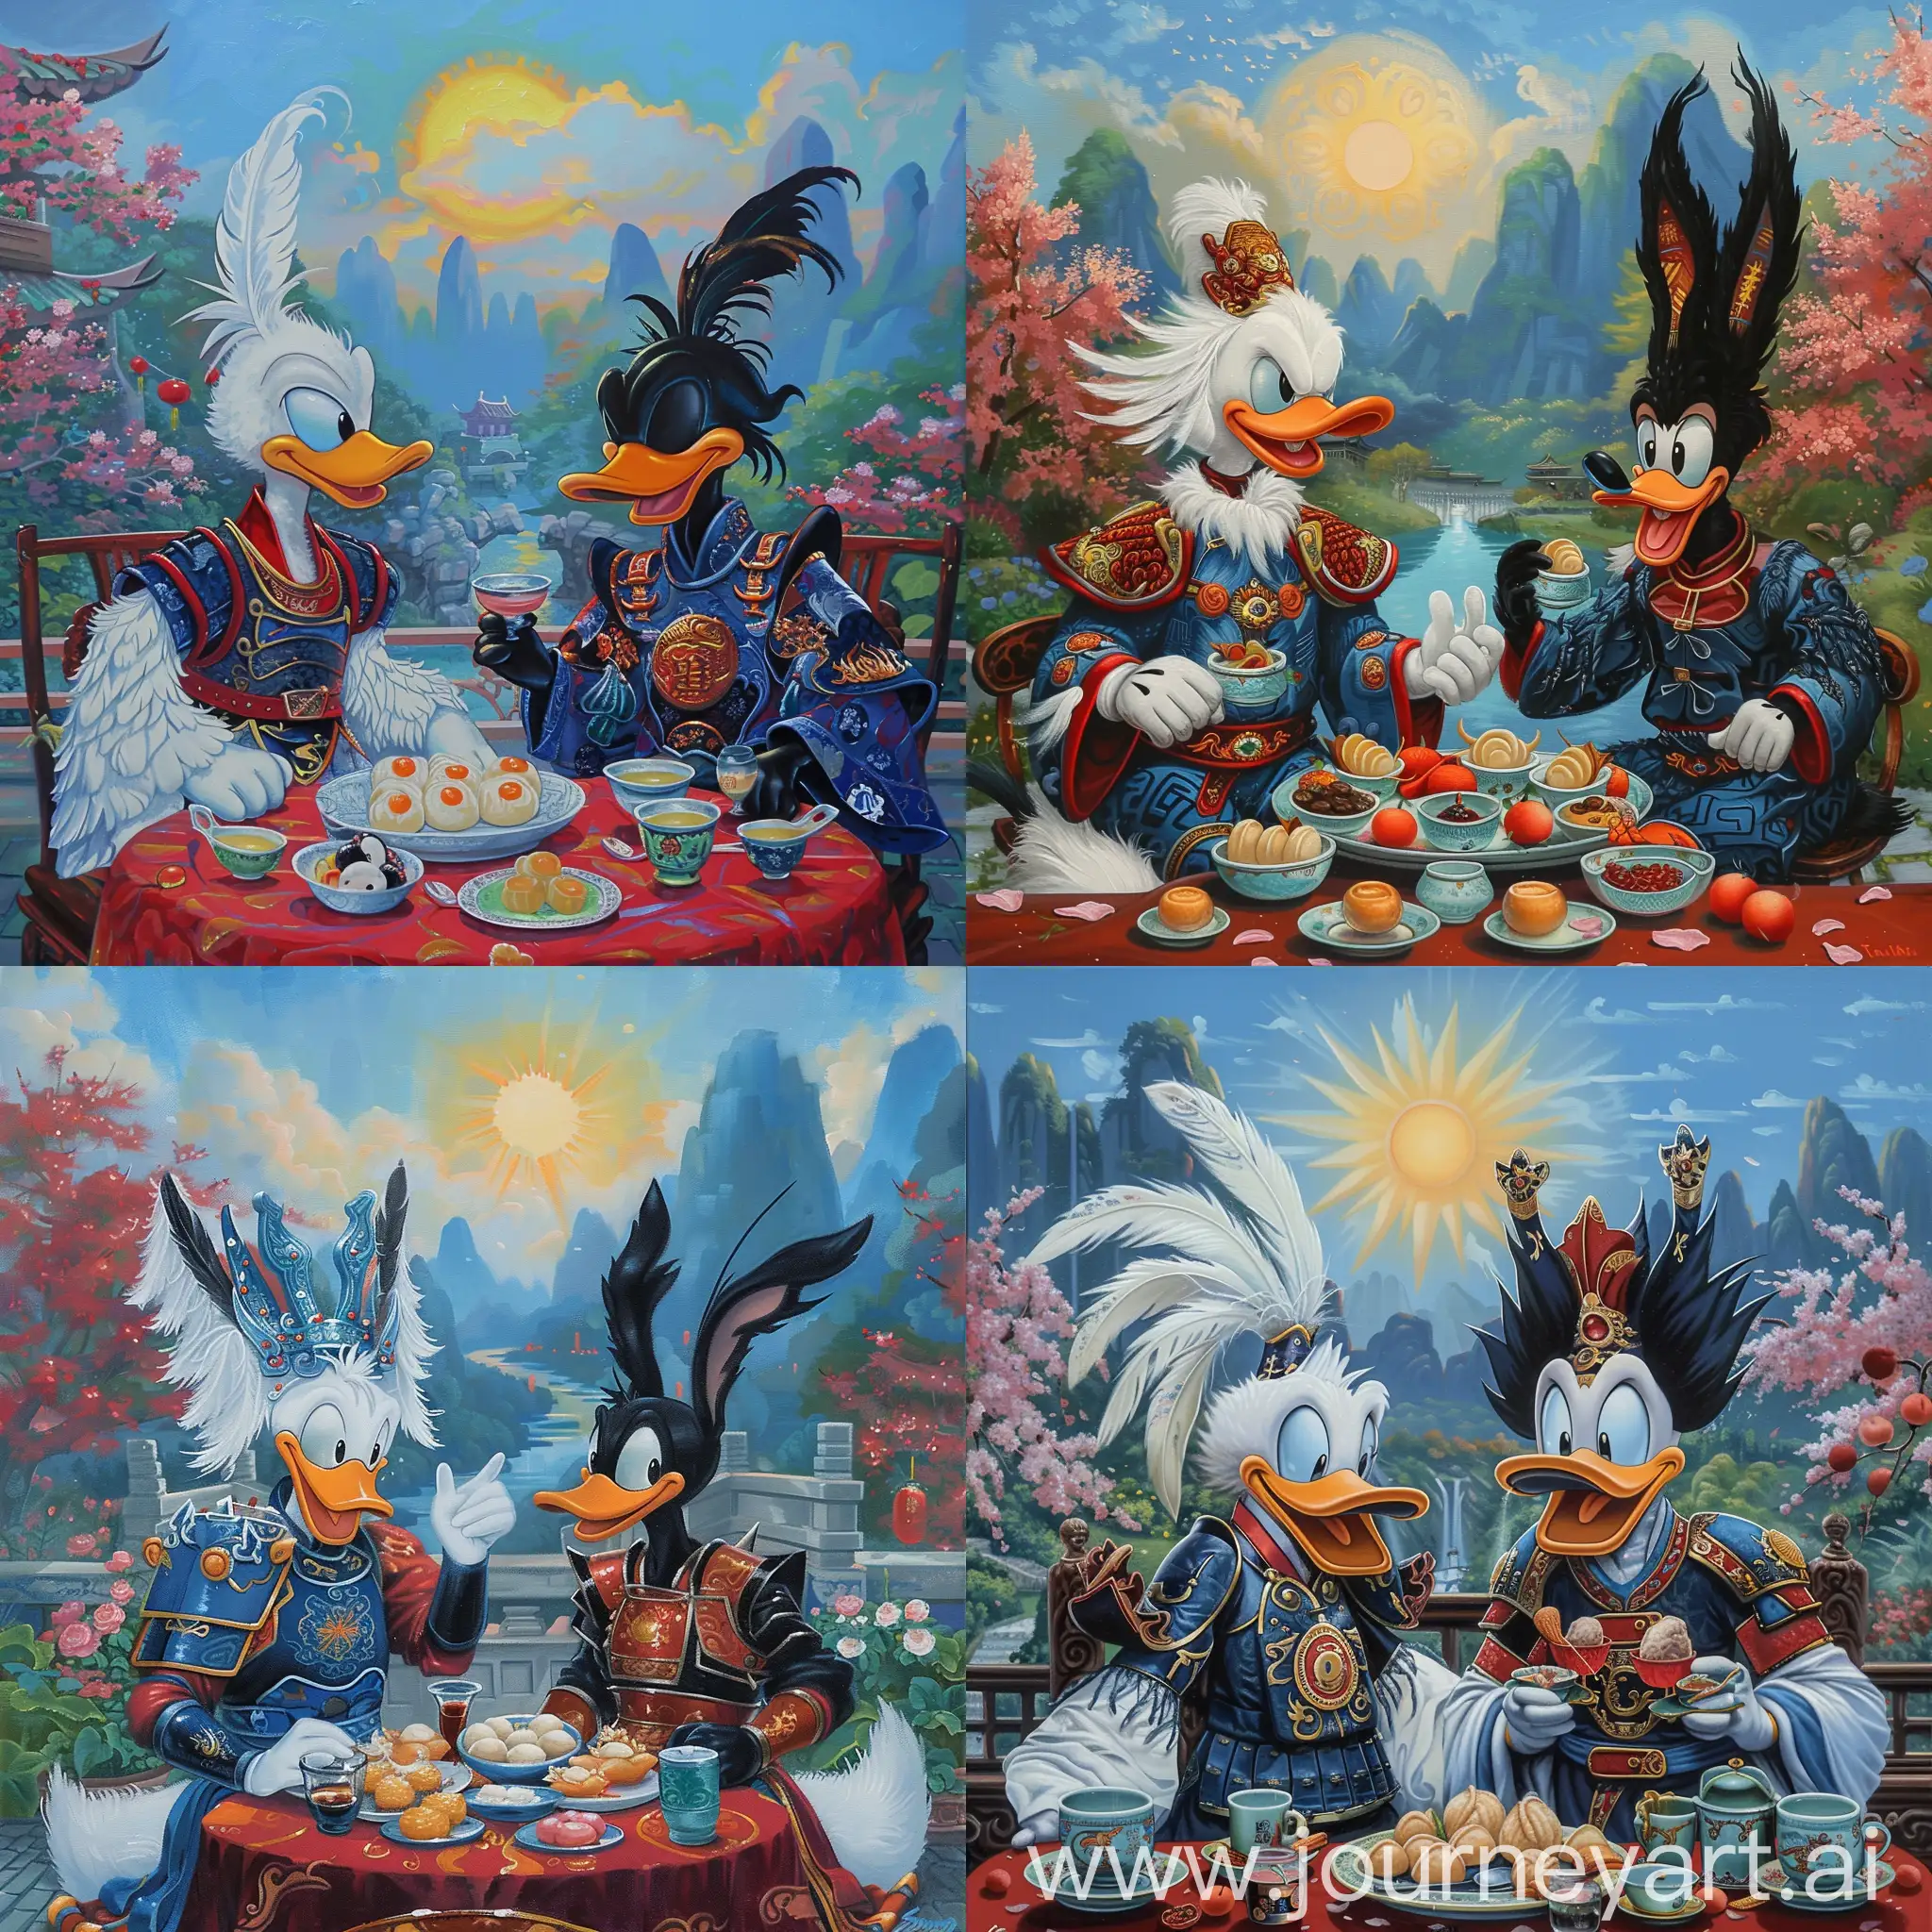 painting mode:

from Warner toon Disney cartoon:

there is white feather Disney's Donald Duck, wearing deep blue and red colors elegant Chinese medieval Hanfu armor.

there is black feather Daffy Duck from Warner deep blue and red colors elegant Chinese medieval Hanfu armor.

they are sitting together, next to each other,

on the dinner table there are delicious Chinese dim sums and jade porcelain cups of wine.

they are inside a splendid Chinese Summer Palace's garden, with rose peach blossom,

Guilin mountain as background,

a yellow sun is smiling in blue sky,